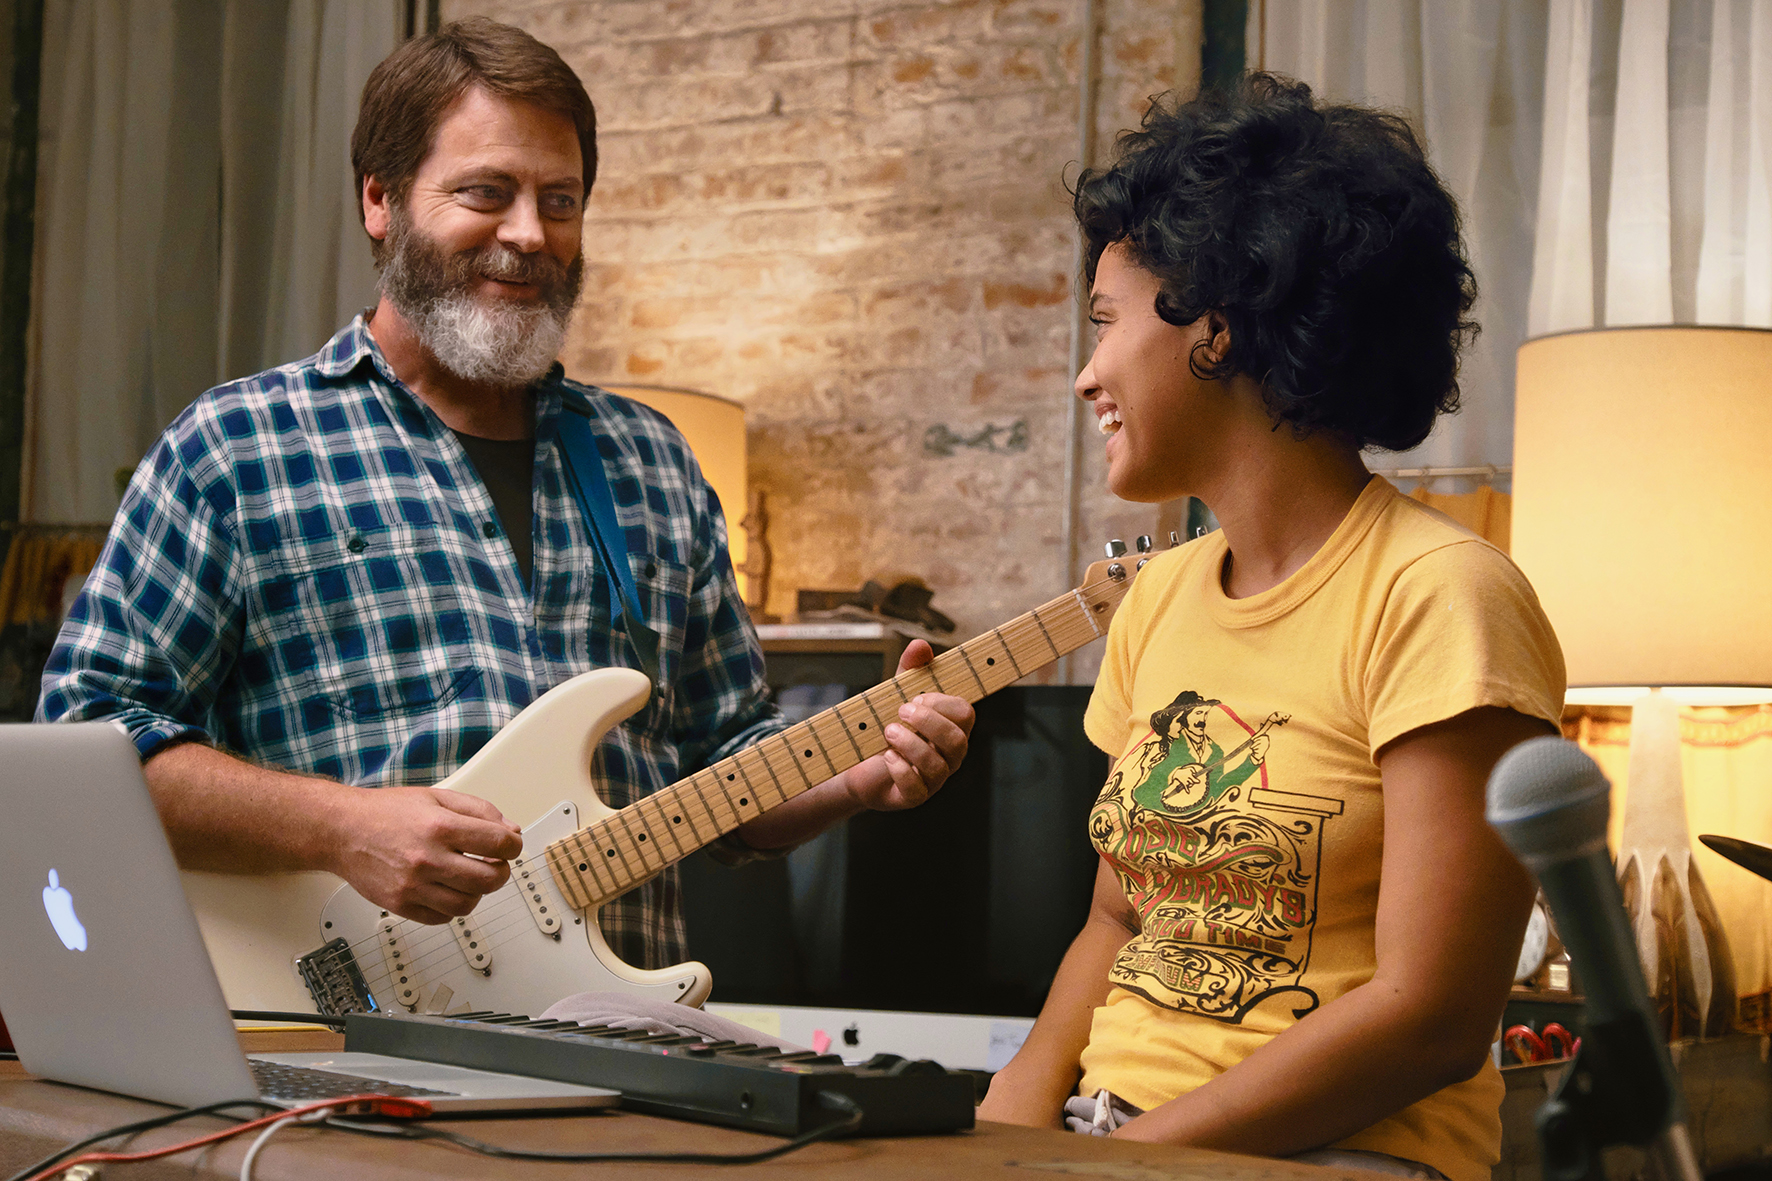 Nick Offerman and Kiersey Clemons play music in Hearts Beat Loud